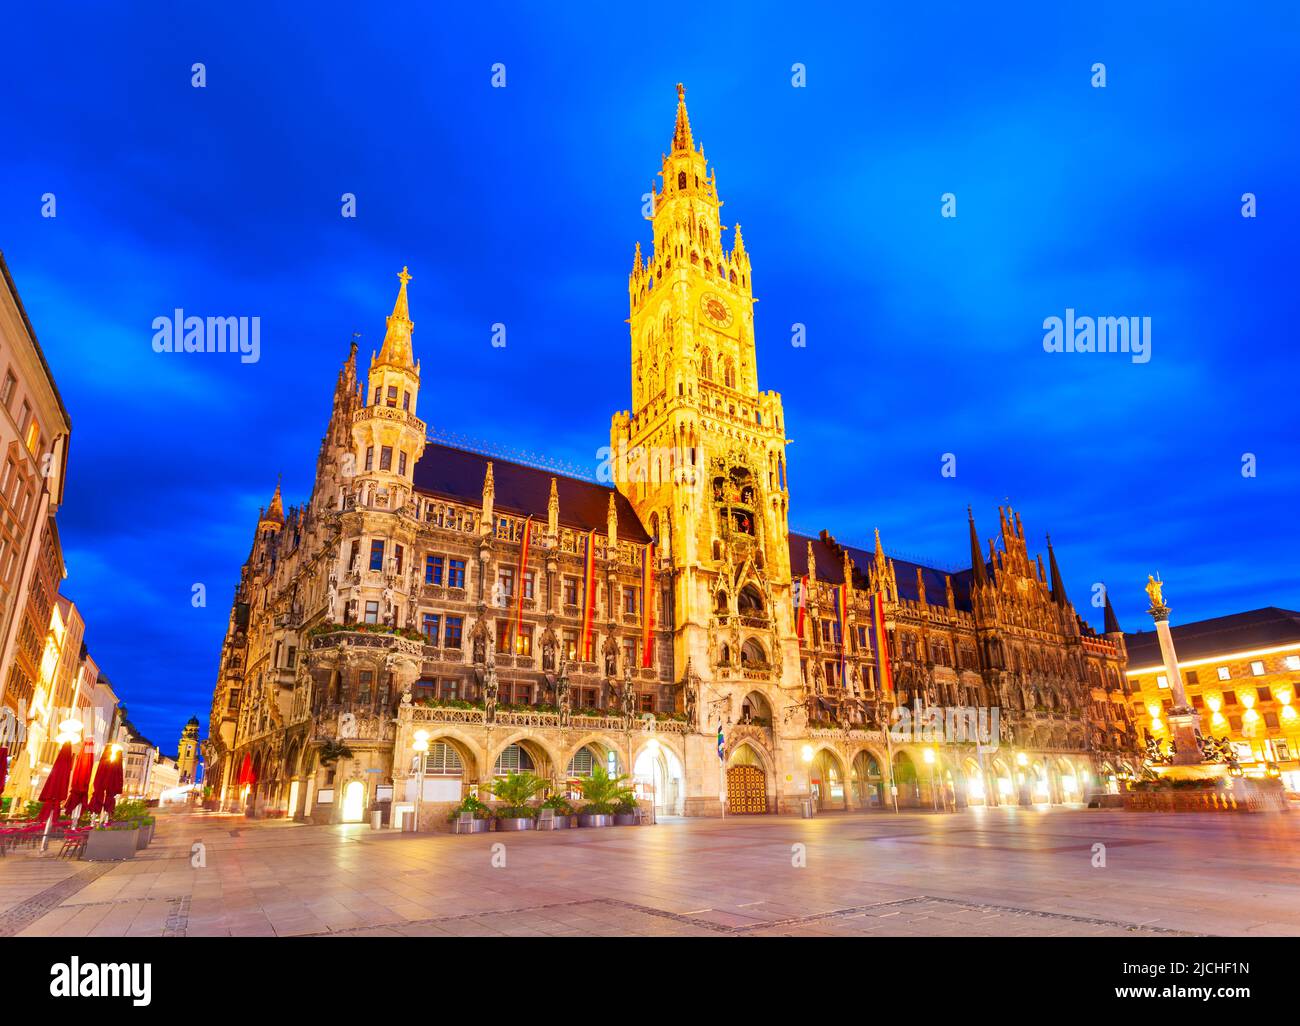 New Town Hall at night. New Town Hall or Neues Rathaus is located at the Marienplatz or St. Mary square, a central square in Munich city centre, Germa Stock Photo